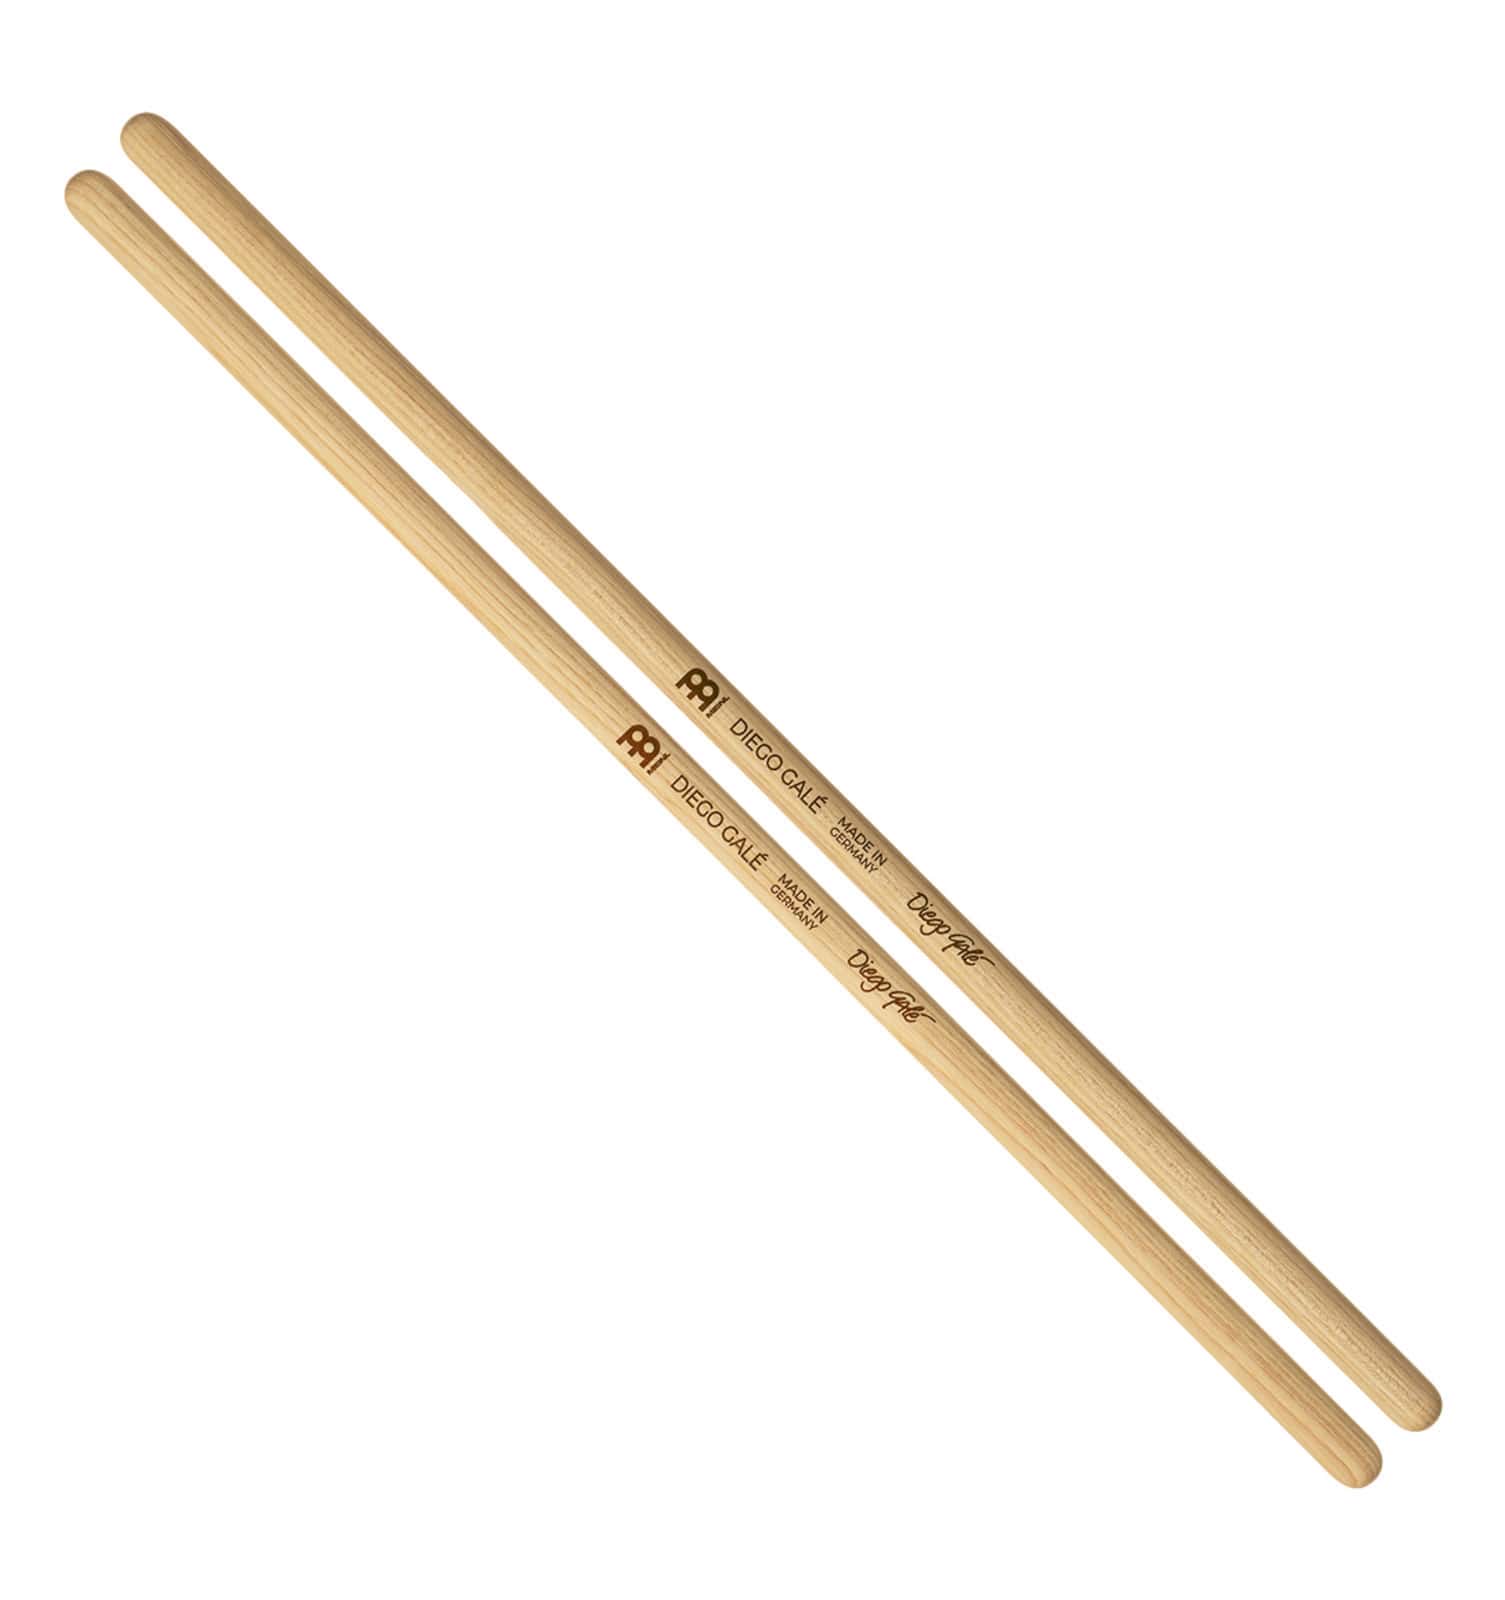 MEINL SB602 - BAGUETTES TIMBALES LATINES 1-2